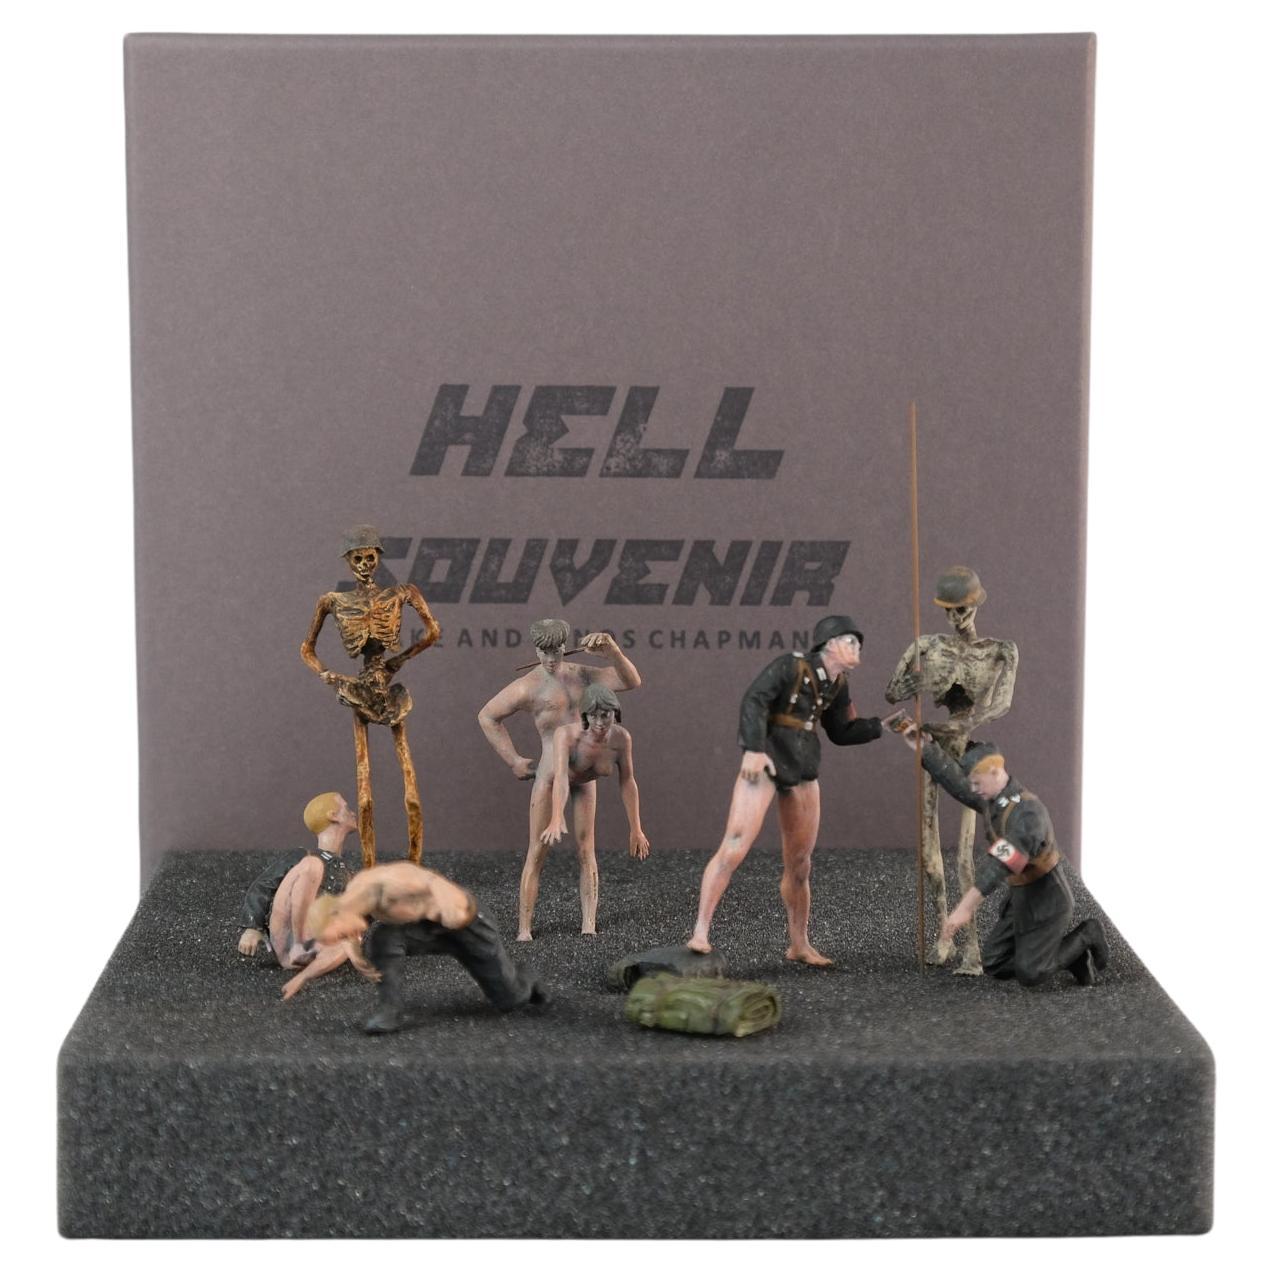 'Hell Souvenir' figures By Jake and Dinos Chapman, 2022 For Sale